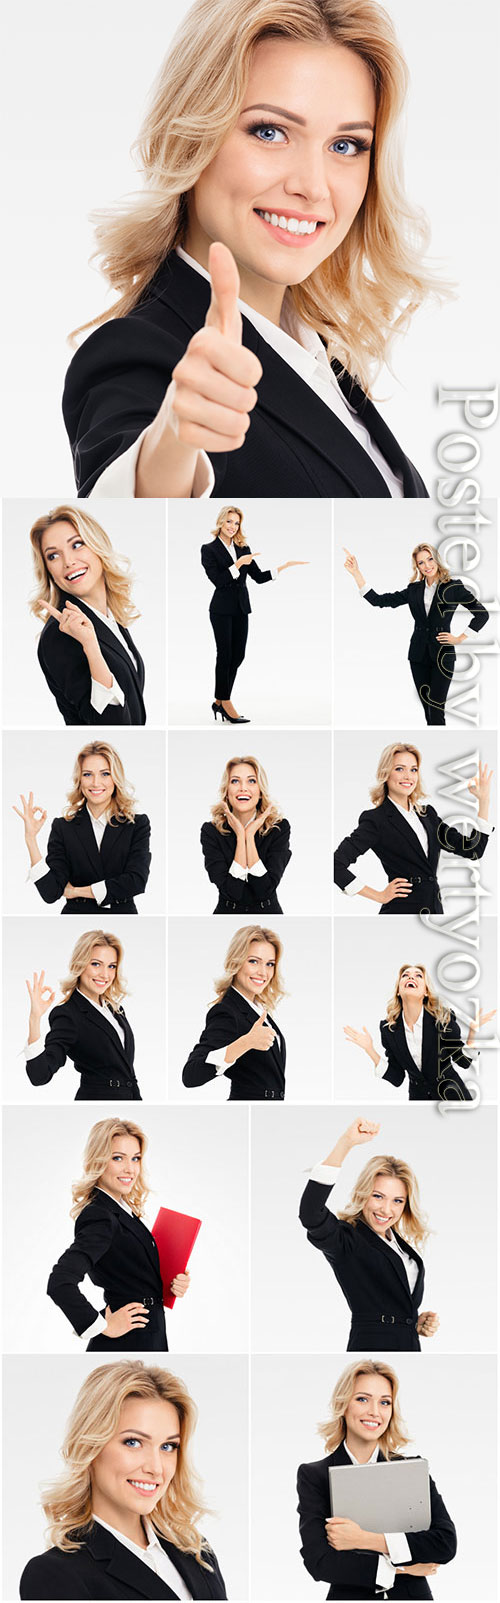 Business woman in black suit stock photo